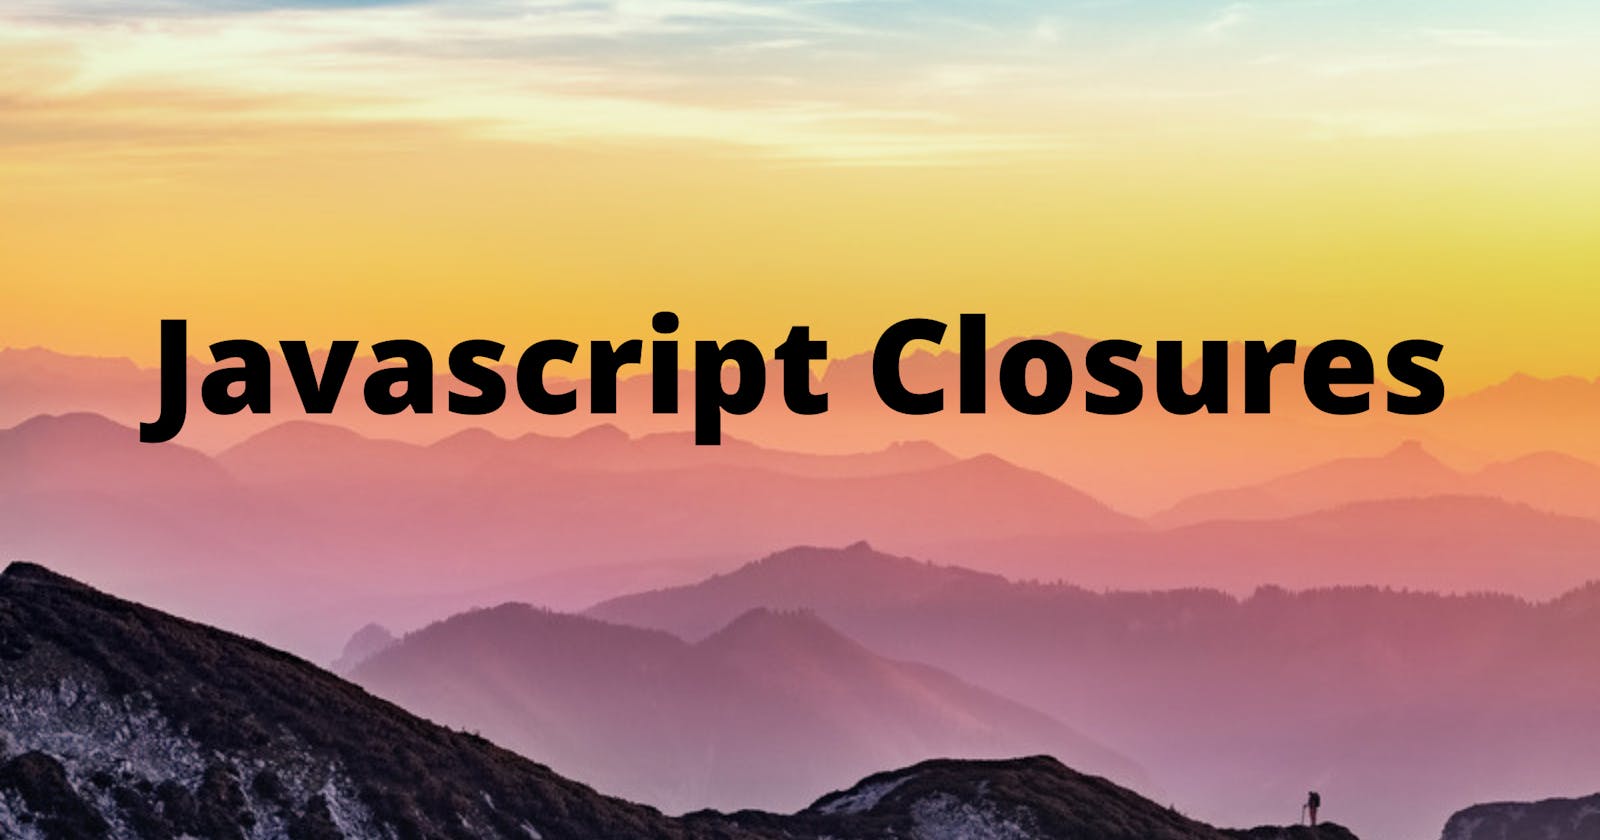 Do you know what is Closures in Javascript?